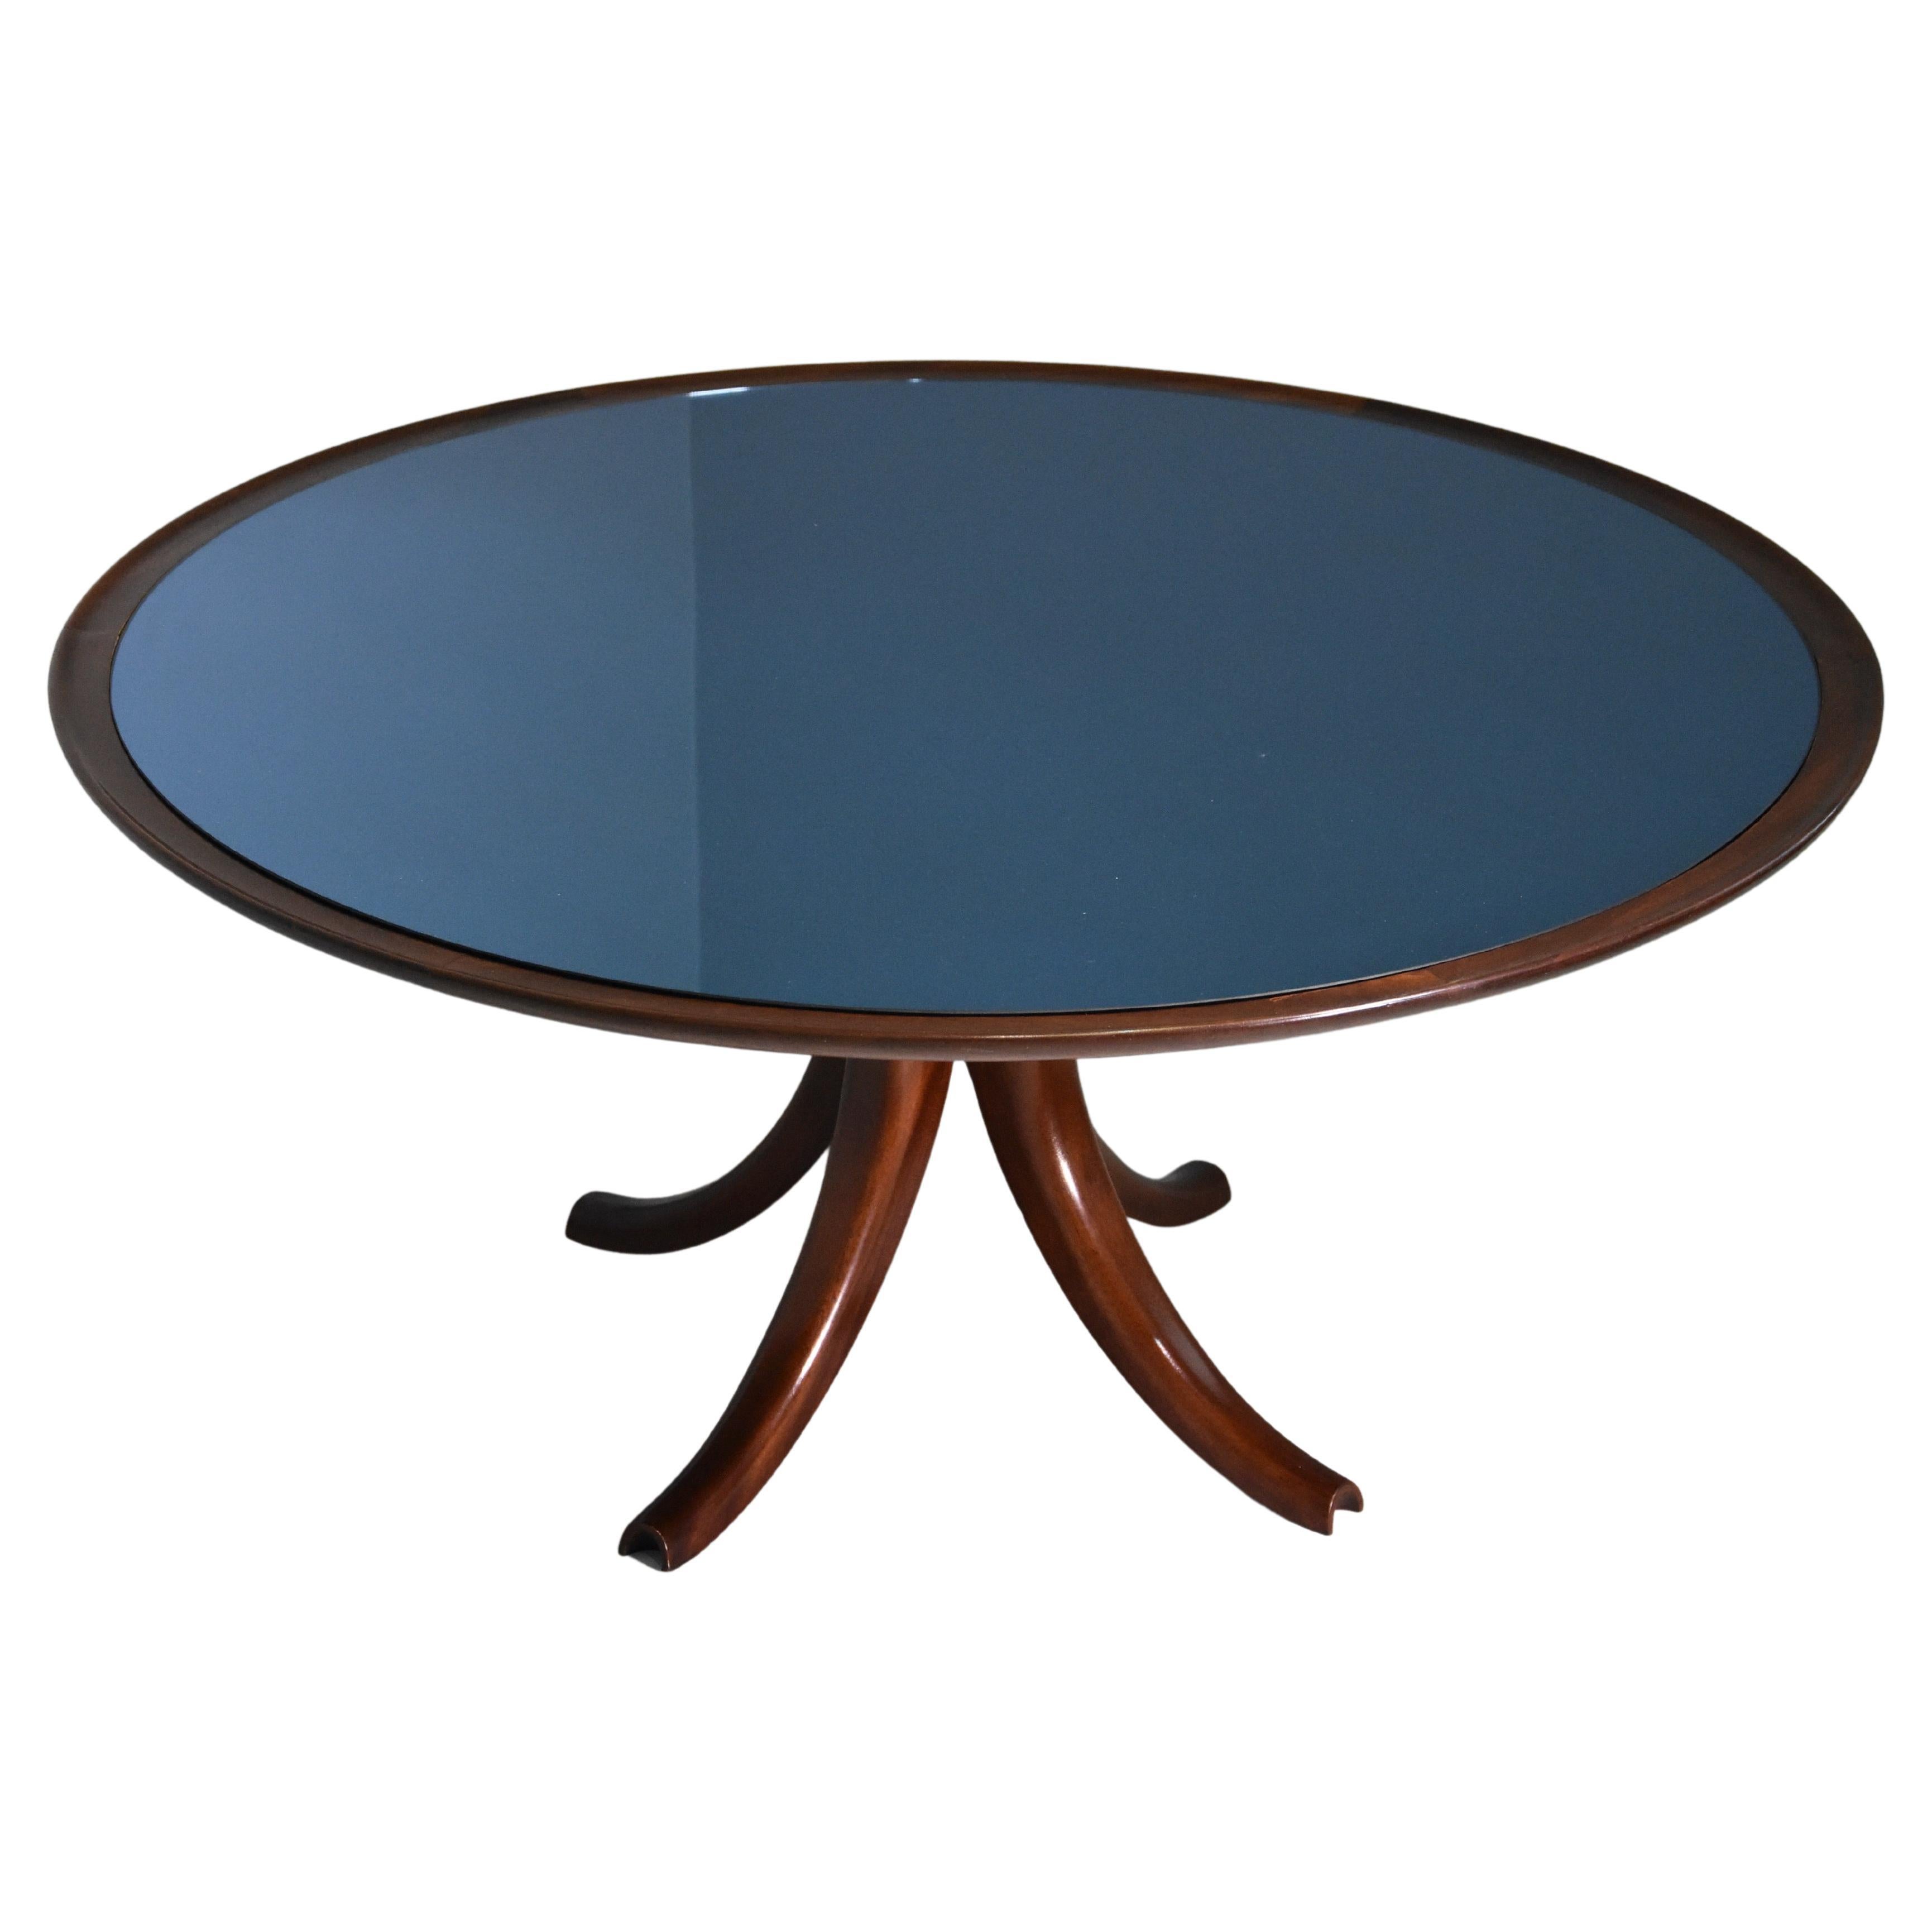 Rare Variant of Big Table Pietro Chiesa for Fontana Arte 1940 Whit Blue Mirror For Sale